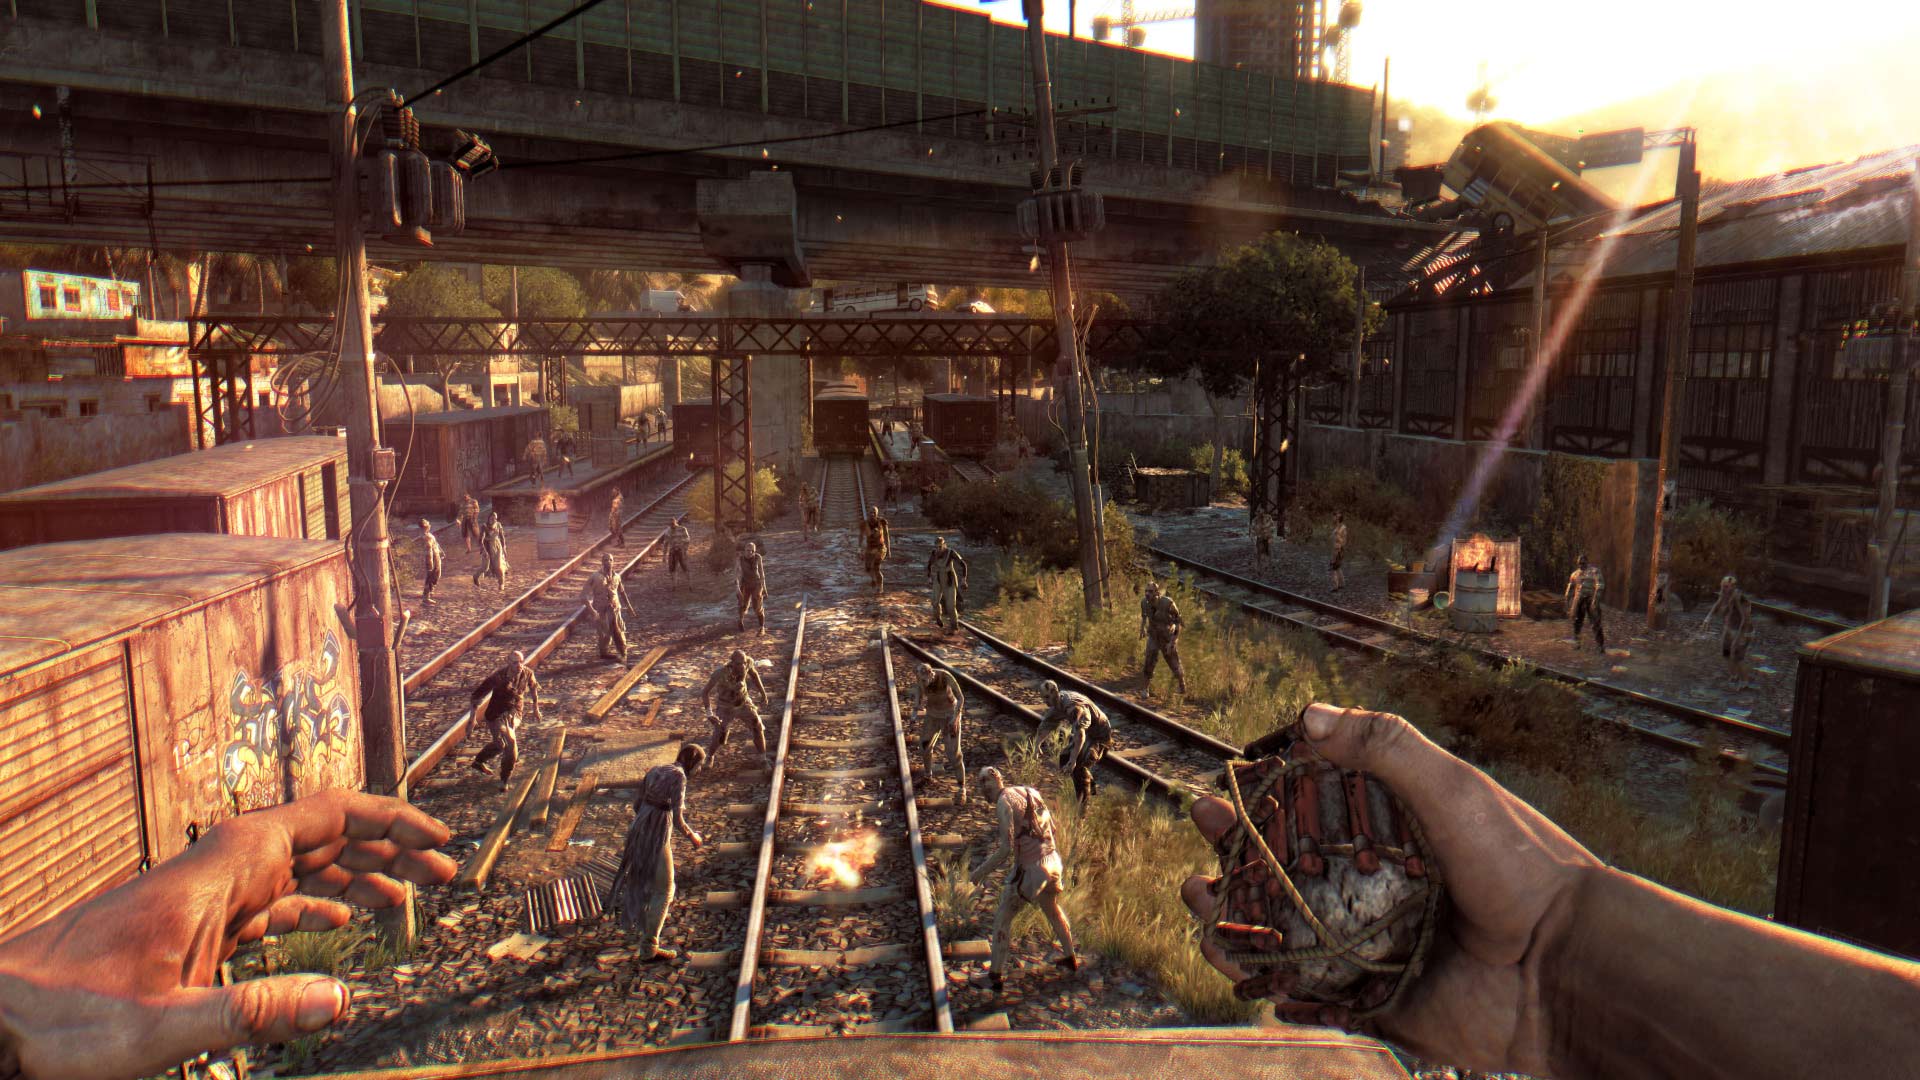 dying light ps4 expansion